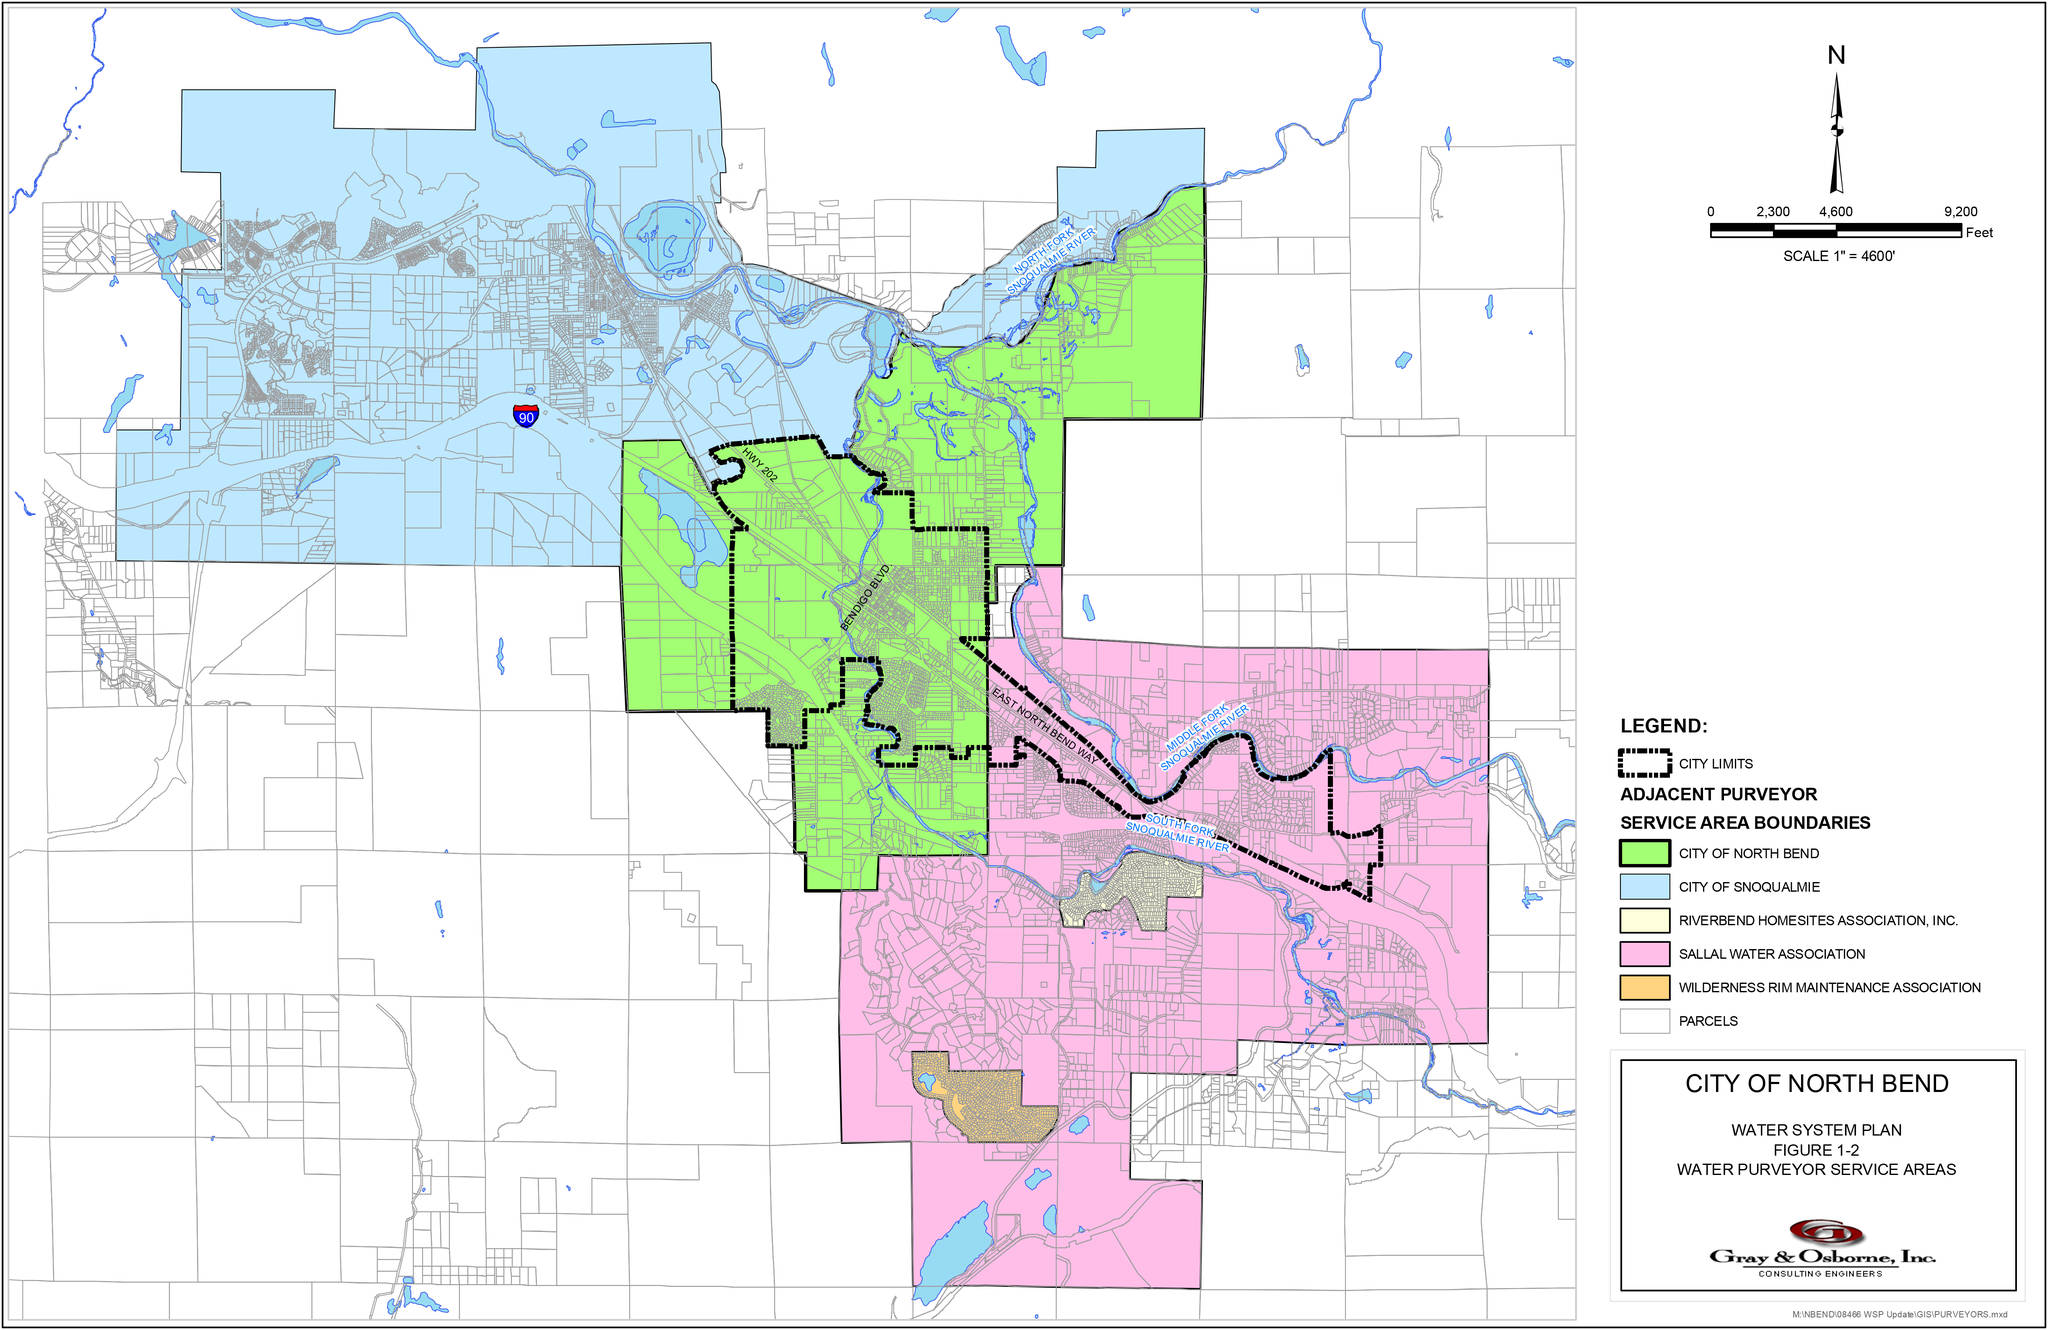 The pink area, serviced by the Sallal Water Association, shown on the map is impacted by the presence of the E. coli bacteria. The green area, the City of North Bend provided water, is safe. Photo courtesy of the City of North Bend